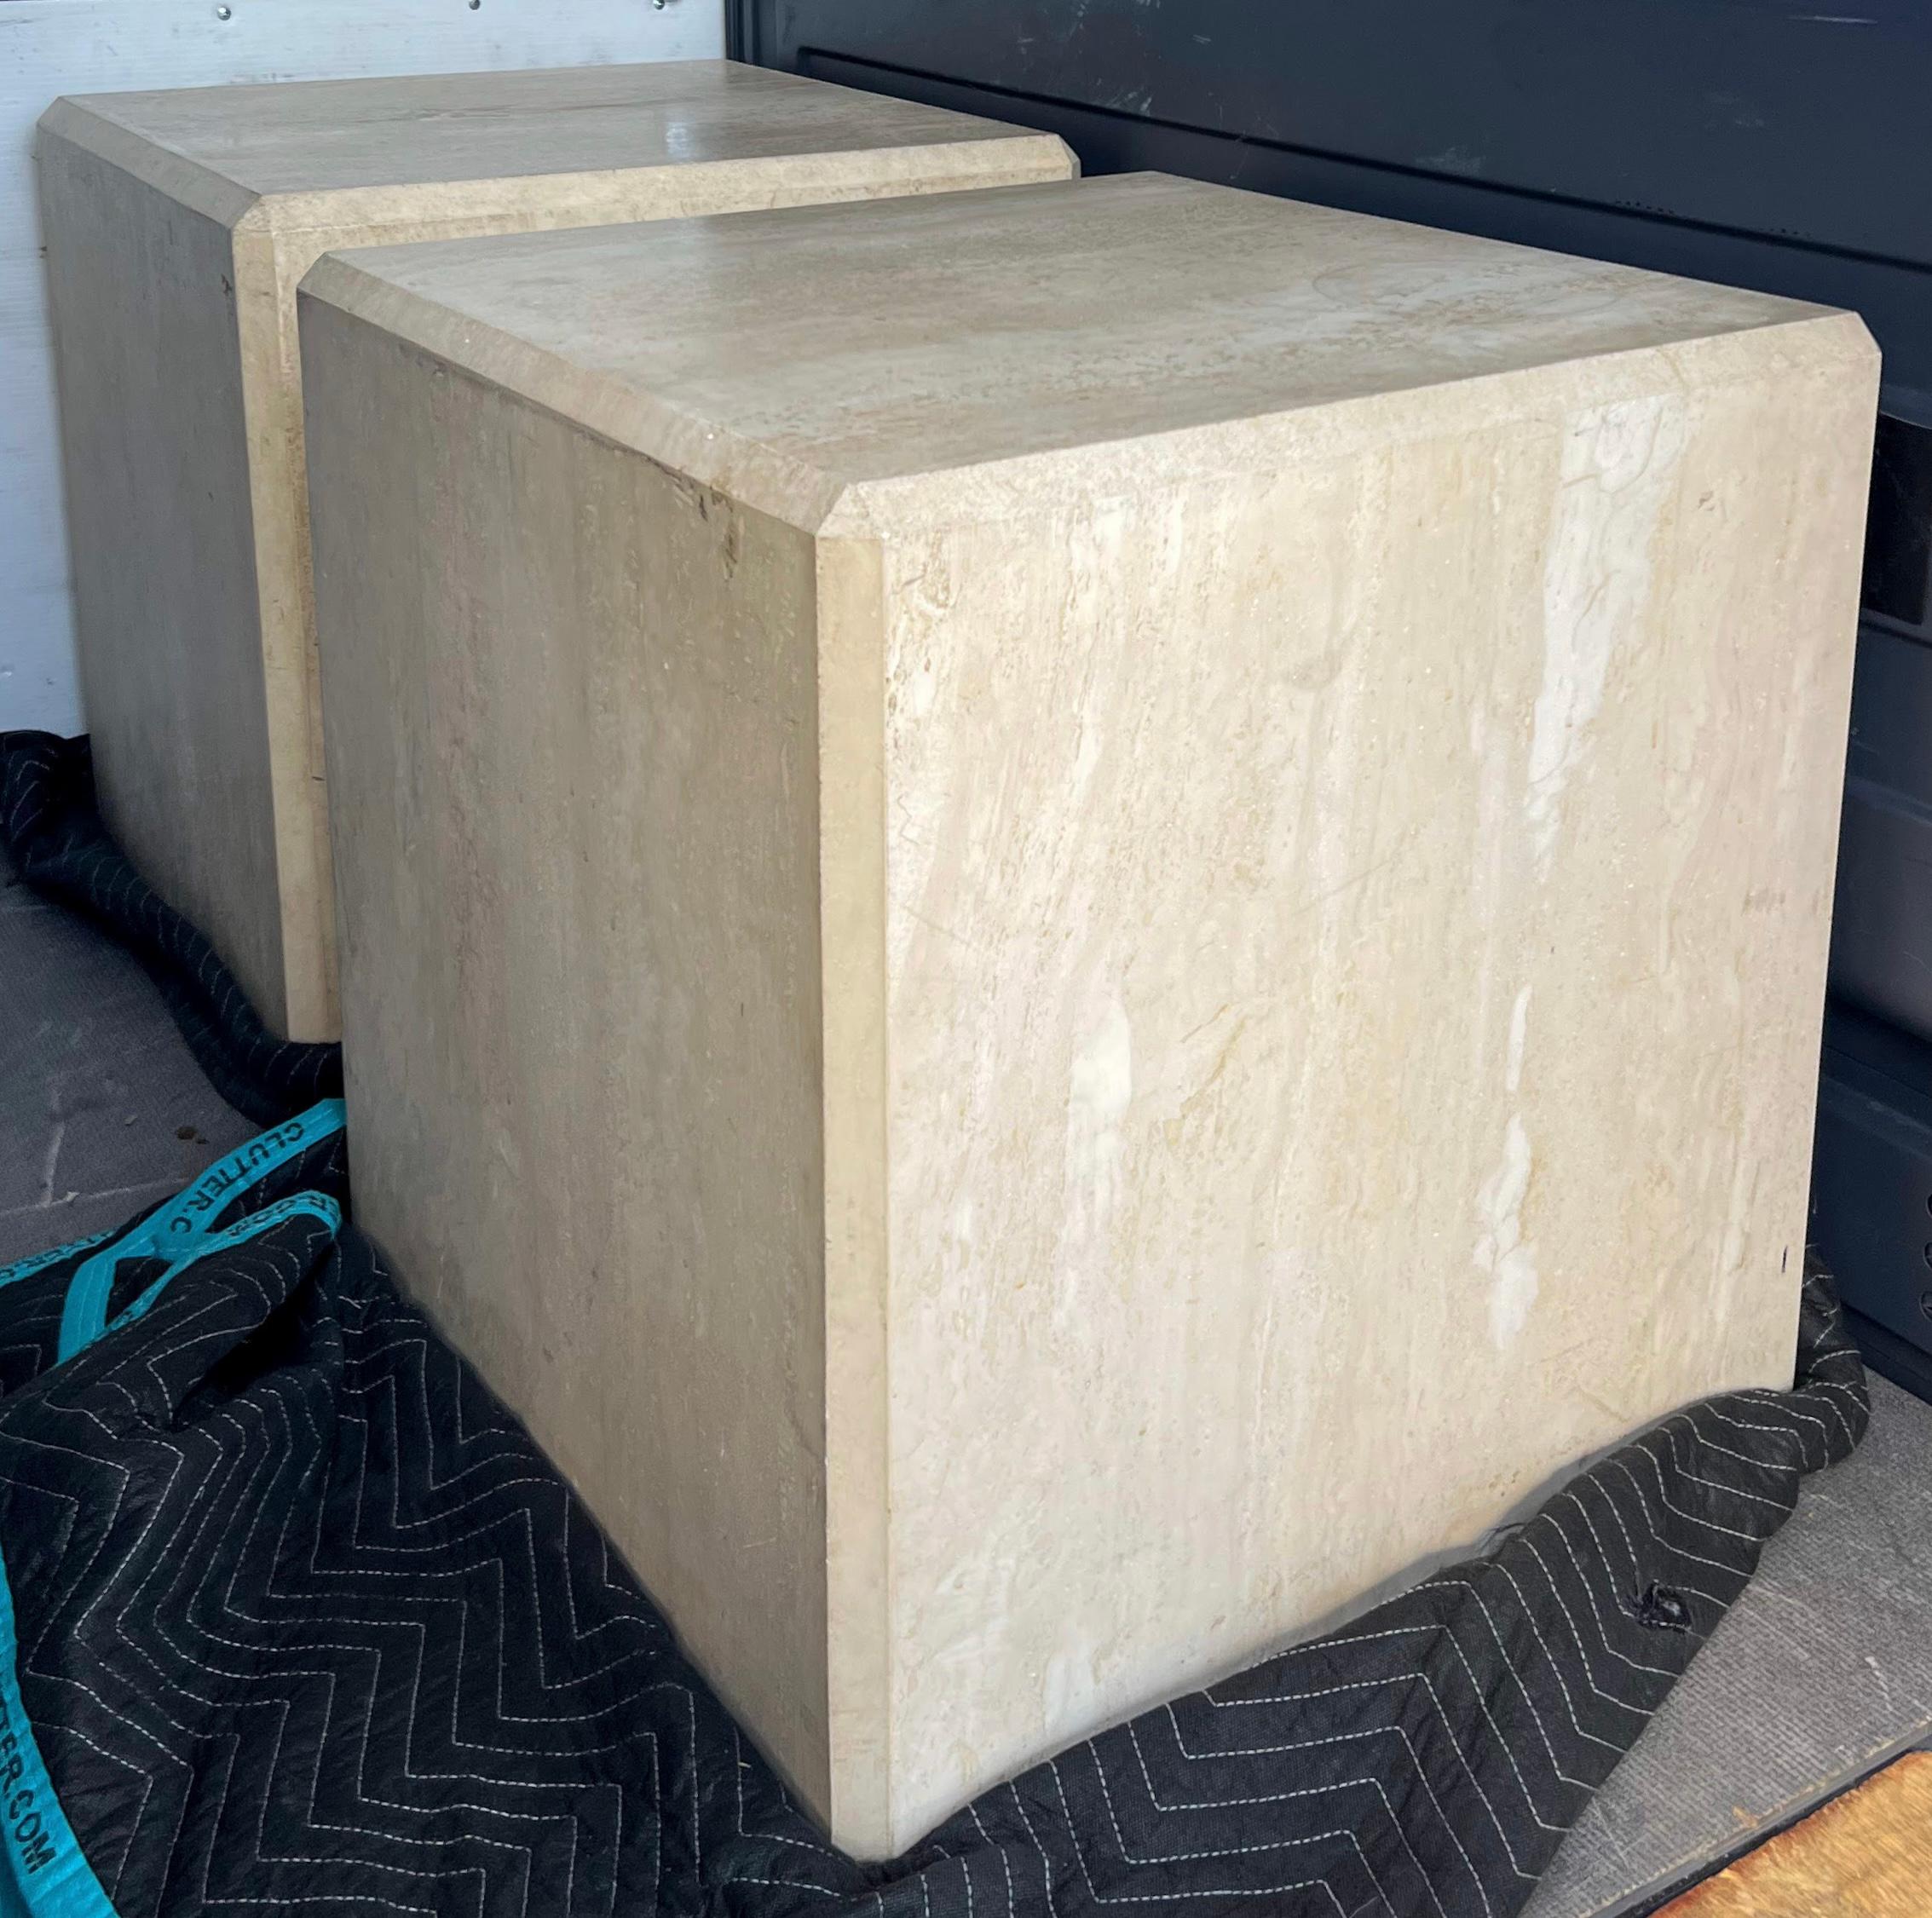 This is a beautiful pair of large scale organic modern travertine side tables. They actually are thick sheets applied around a wooden core. The edges are beveled. Each table is approximately 180 lbs. They are unmarked and in very good condition.